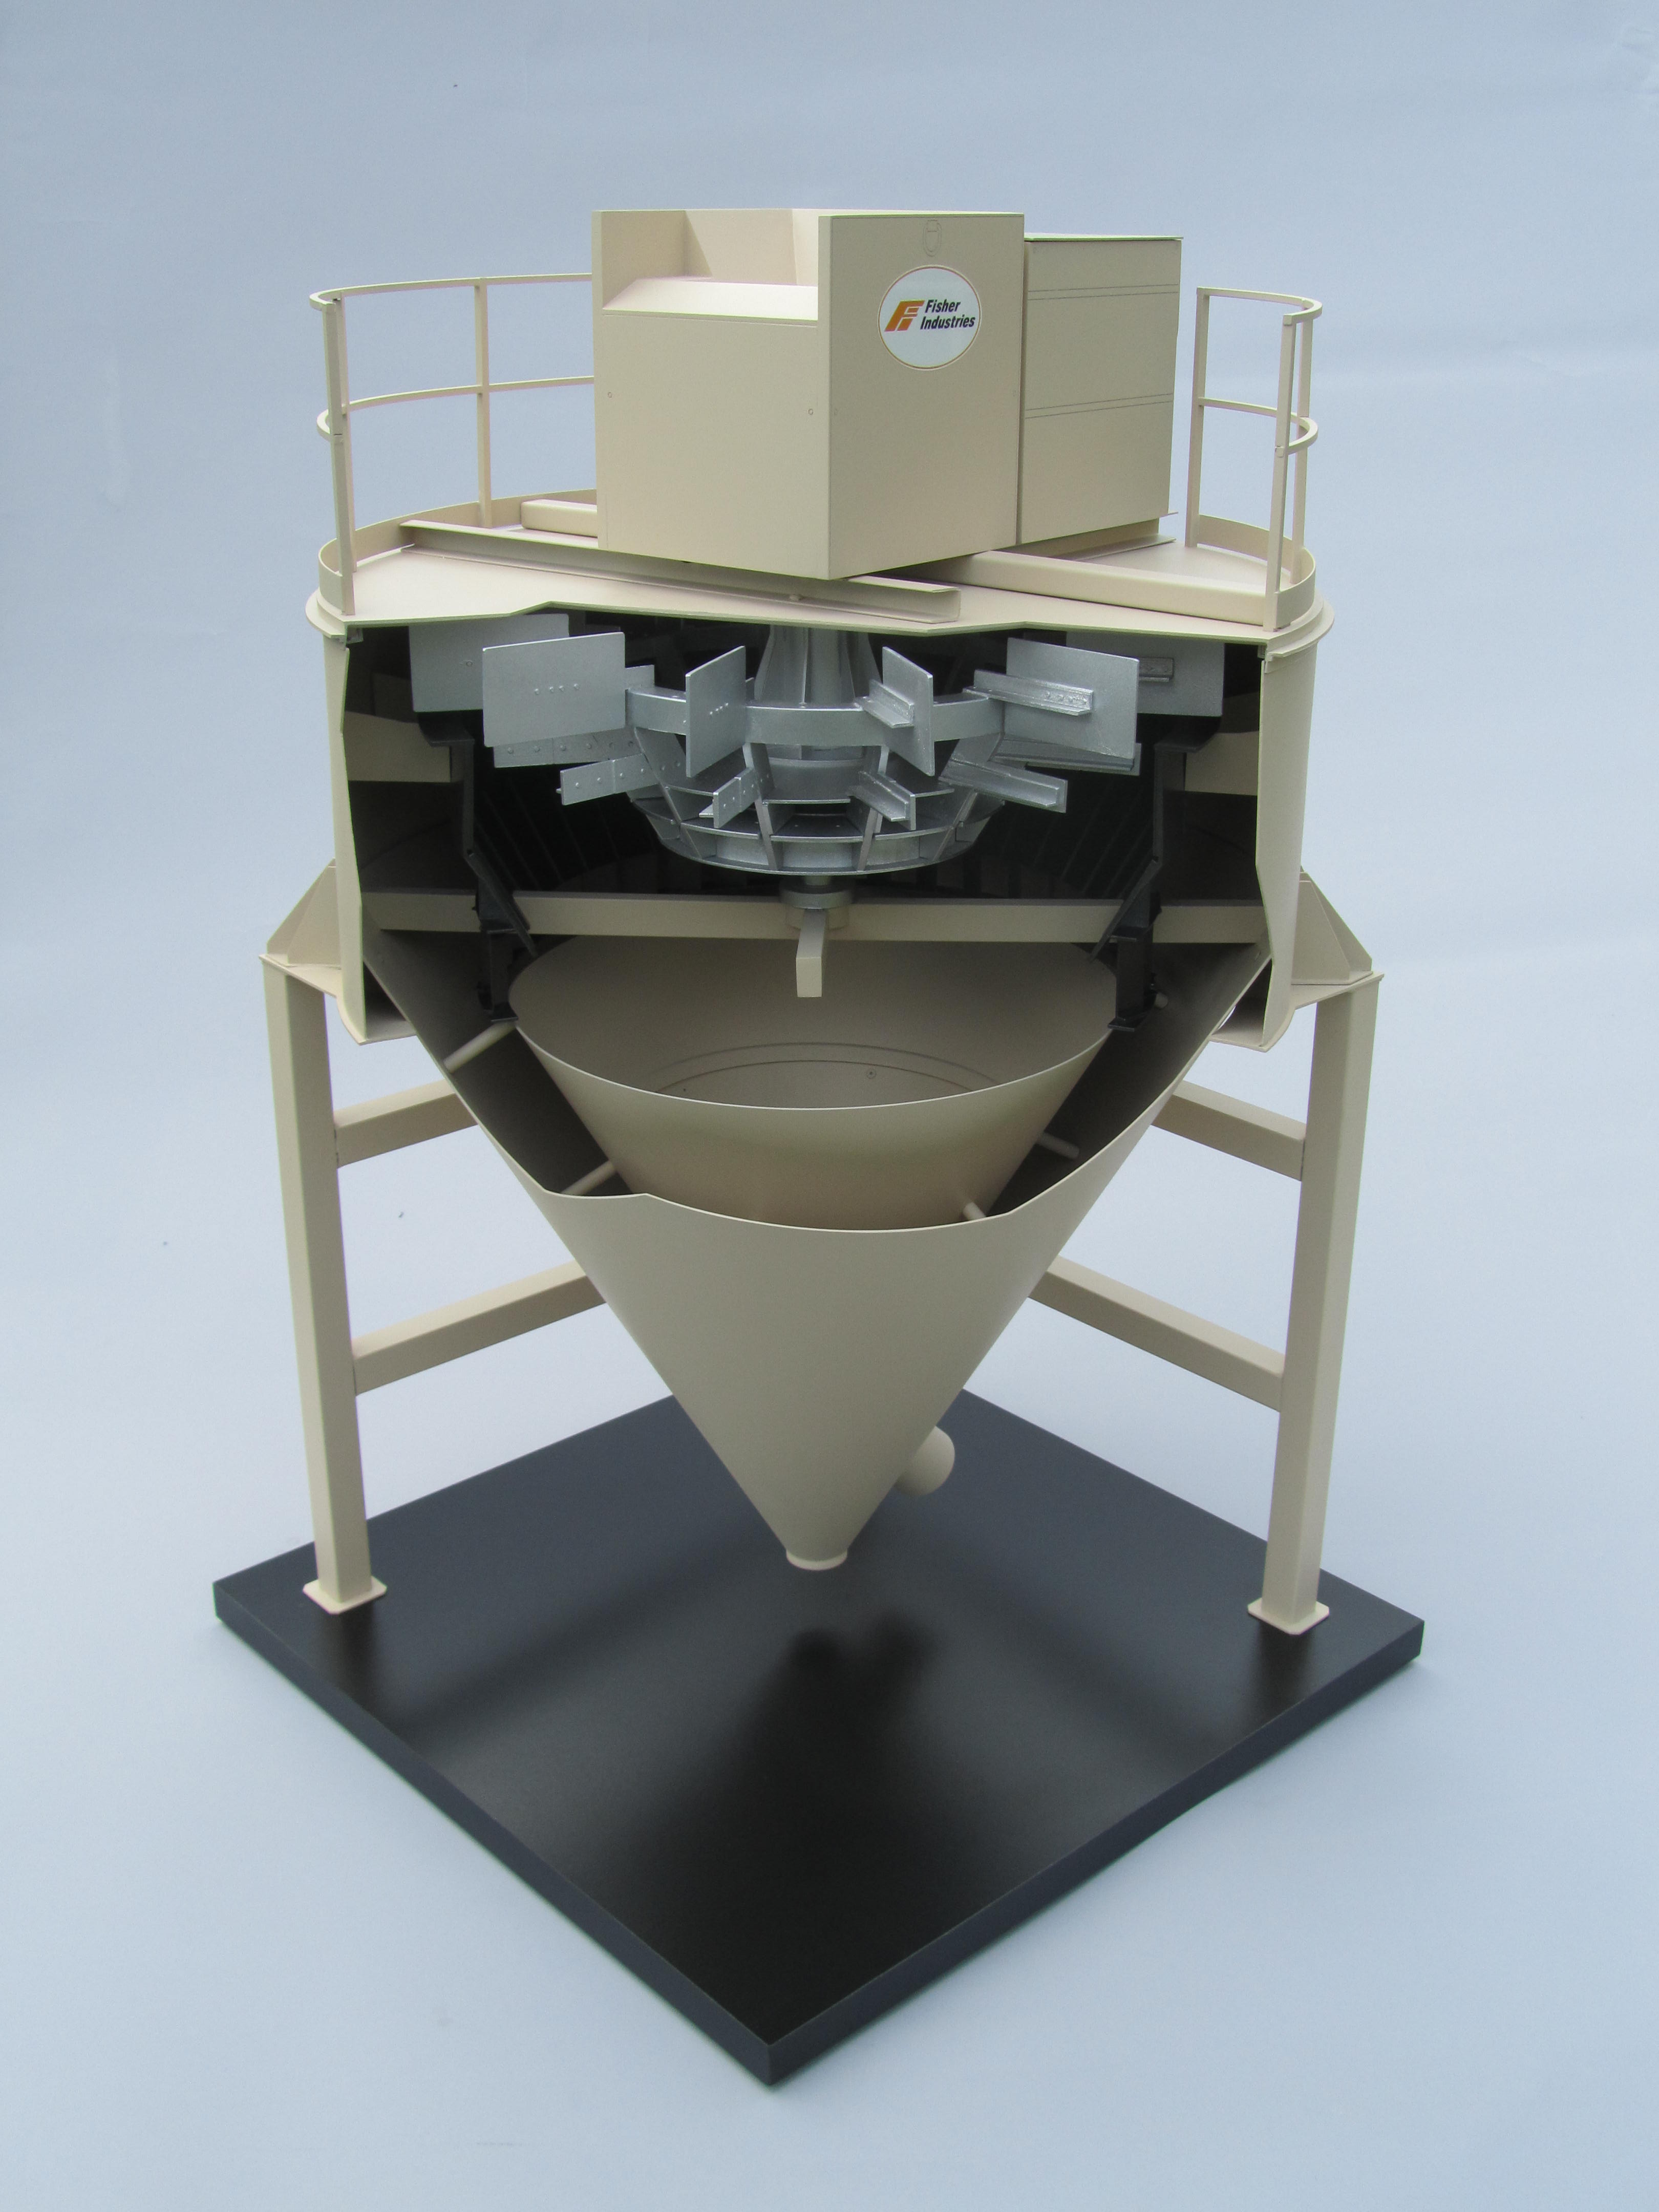 Working Model of an Air Separator